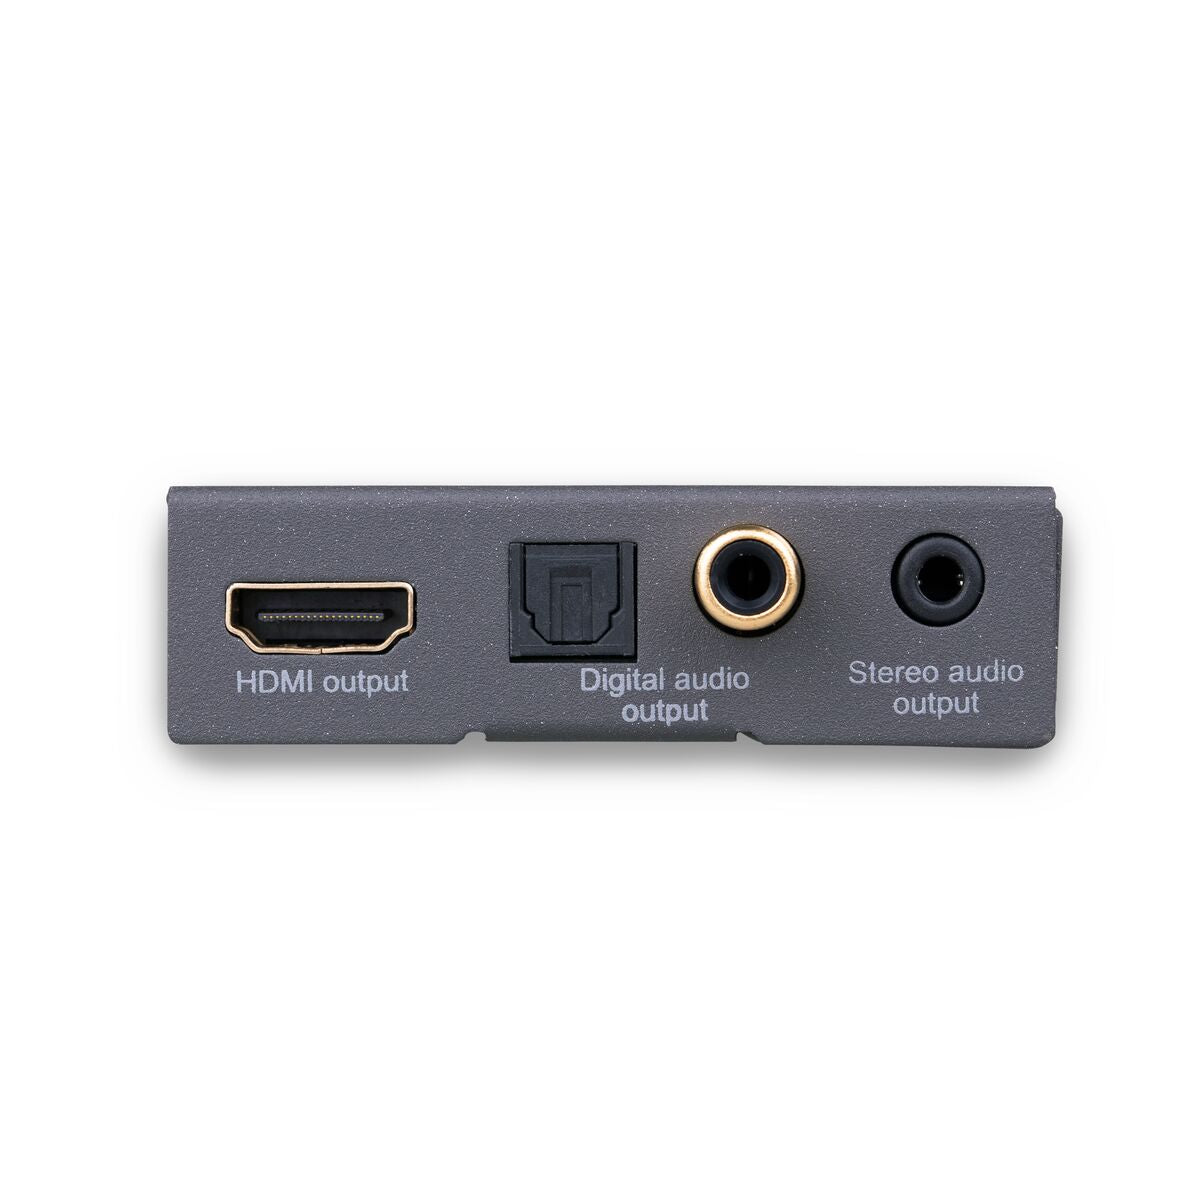 Connect AE14 - HDMI Audio Extractor 4K - Connections Image with HDMI and AUDIO out | Marmitek